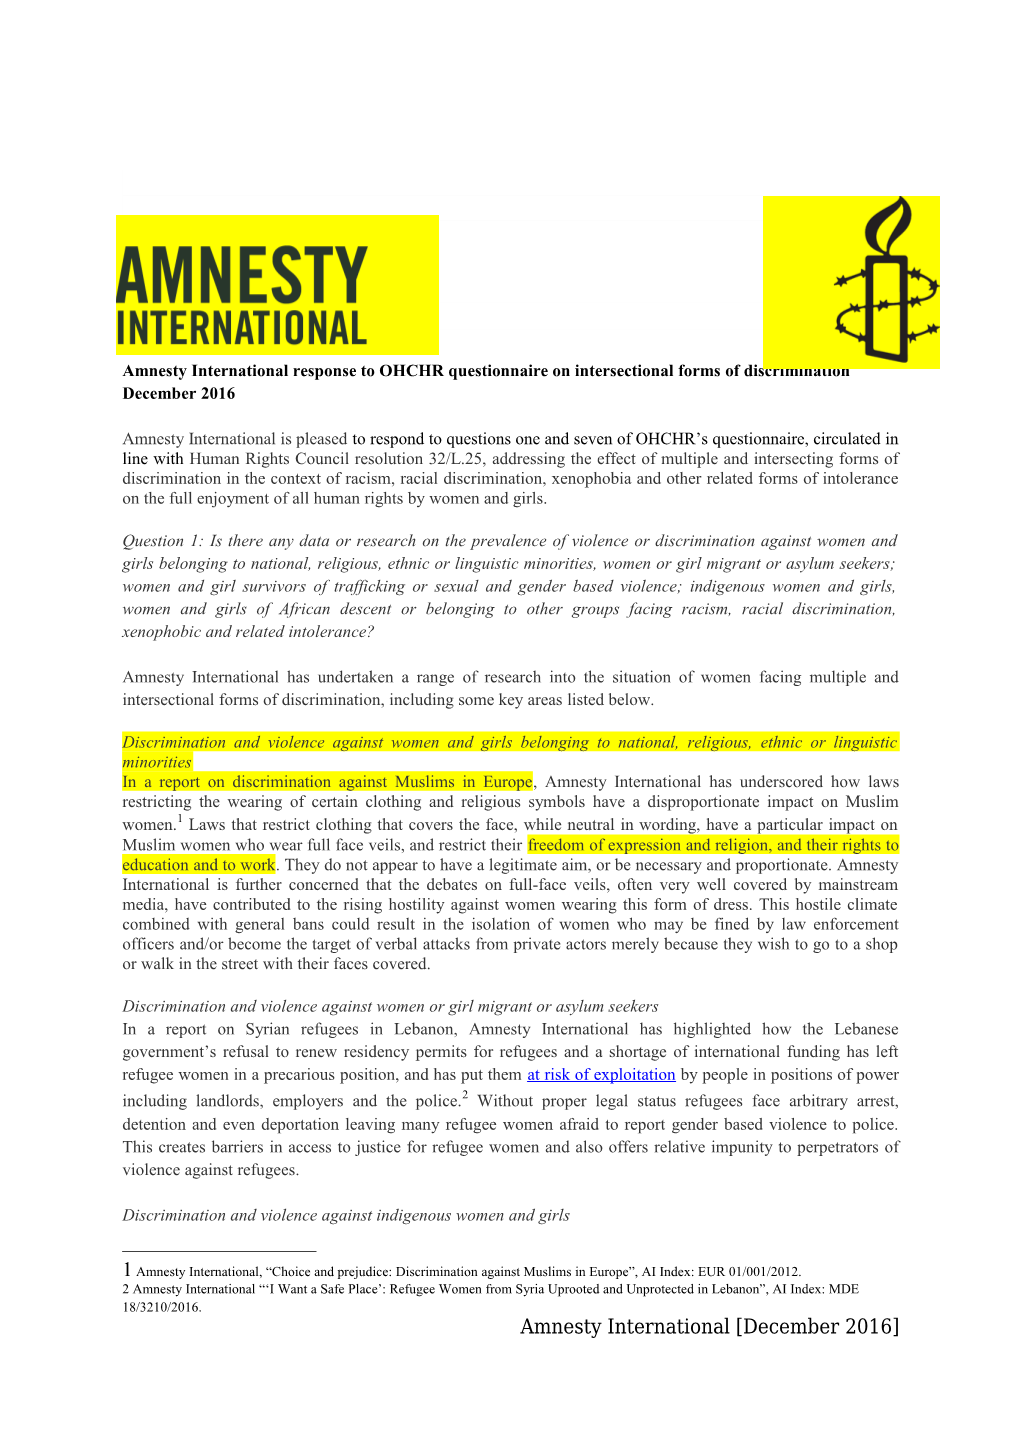 10 Amnesty International Response to OHCHR Quesionnaire on Intersectional Forms Of